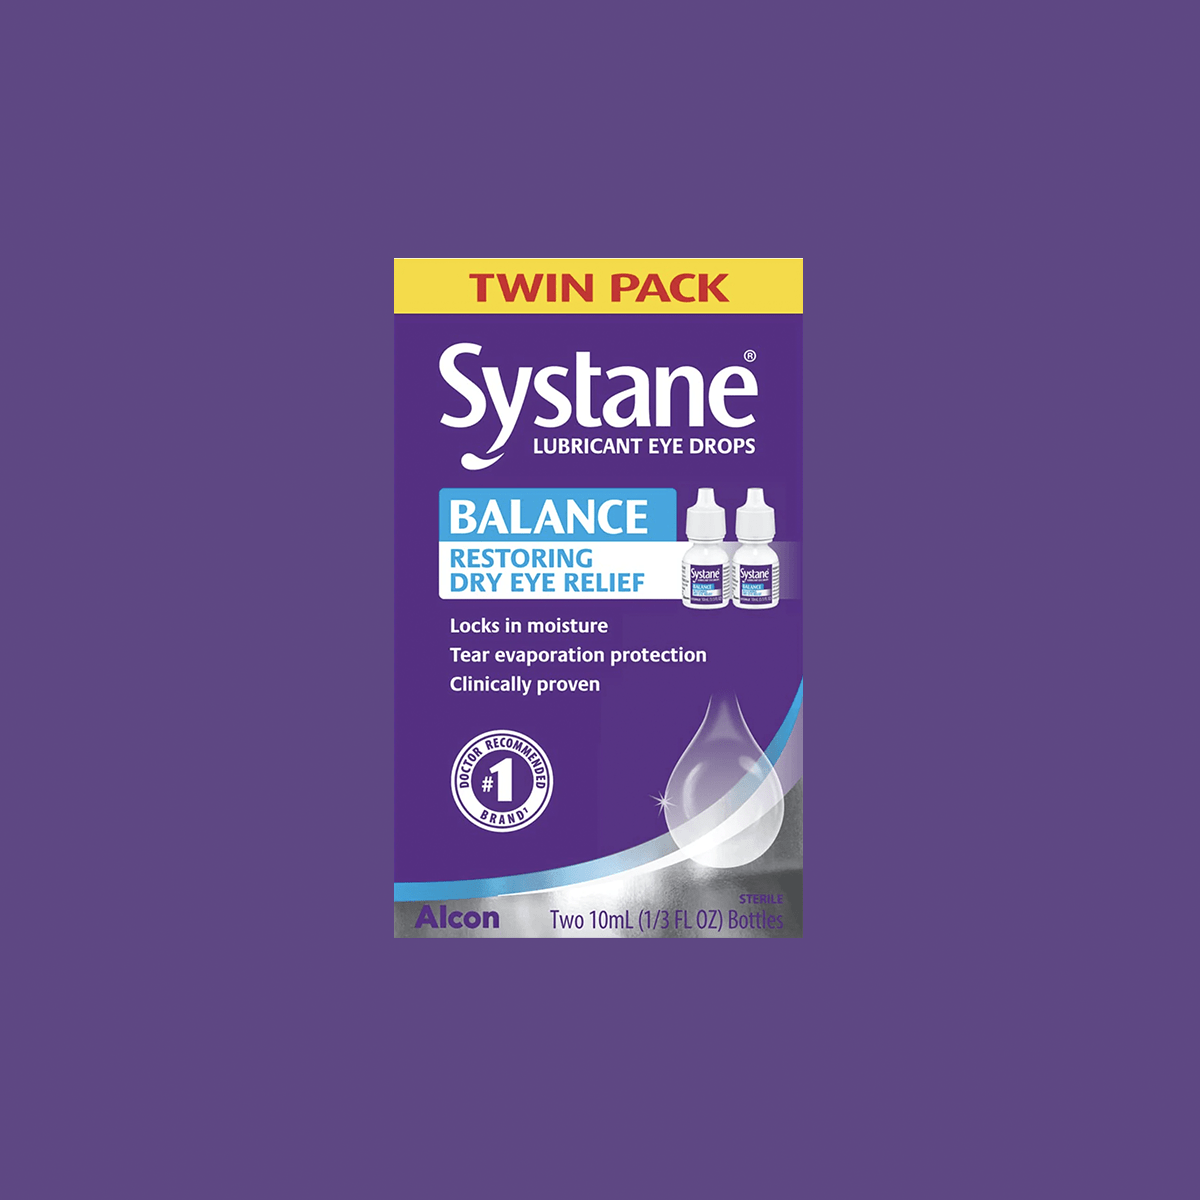 Systane Balance Lubricant Eye Drops, MGD, Tear Evaporation Protection (2 Bottles) - Dryeye Rescue